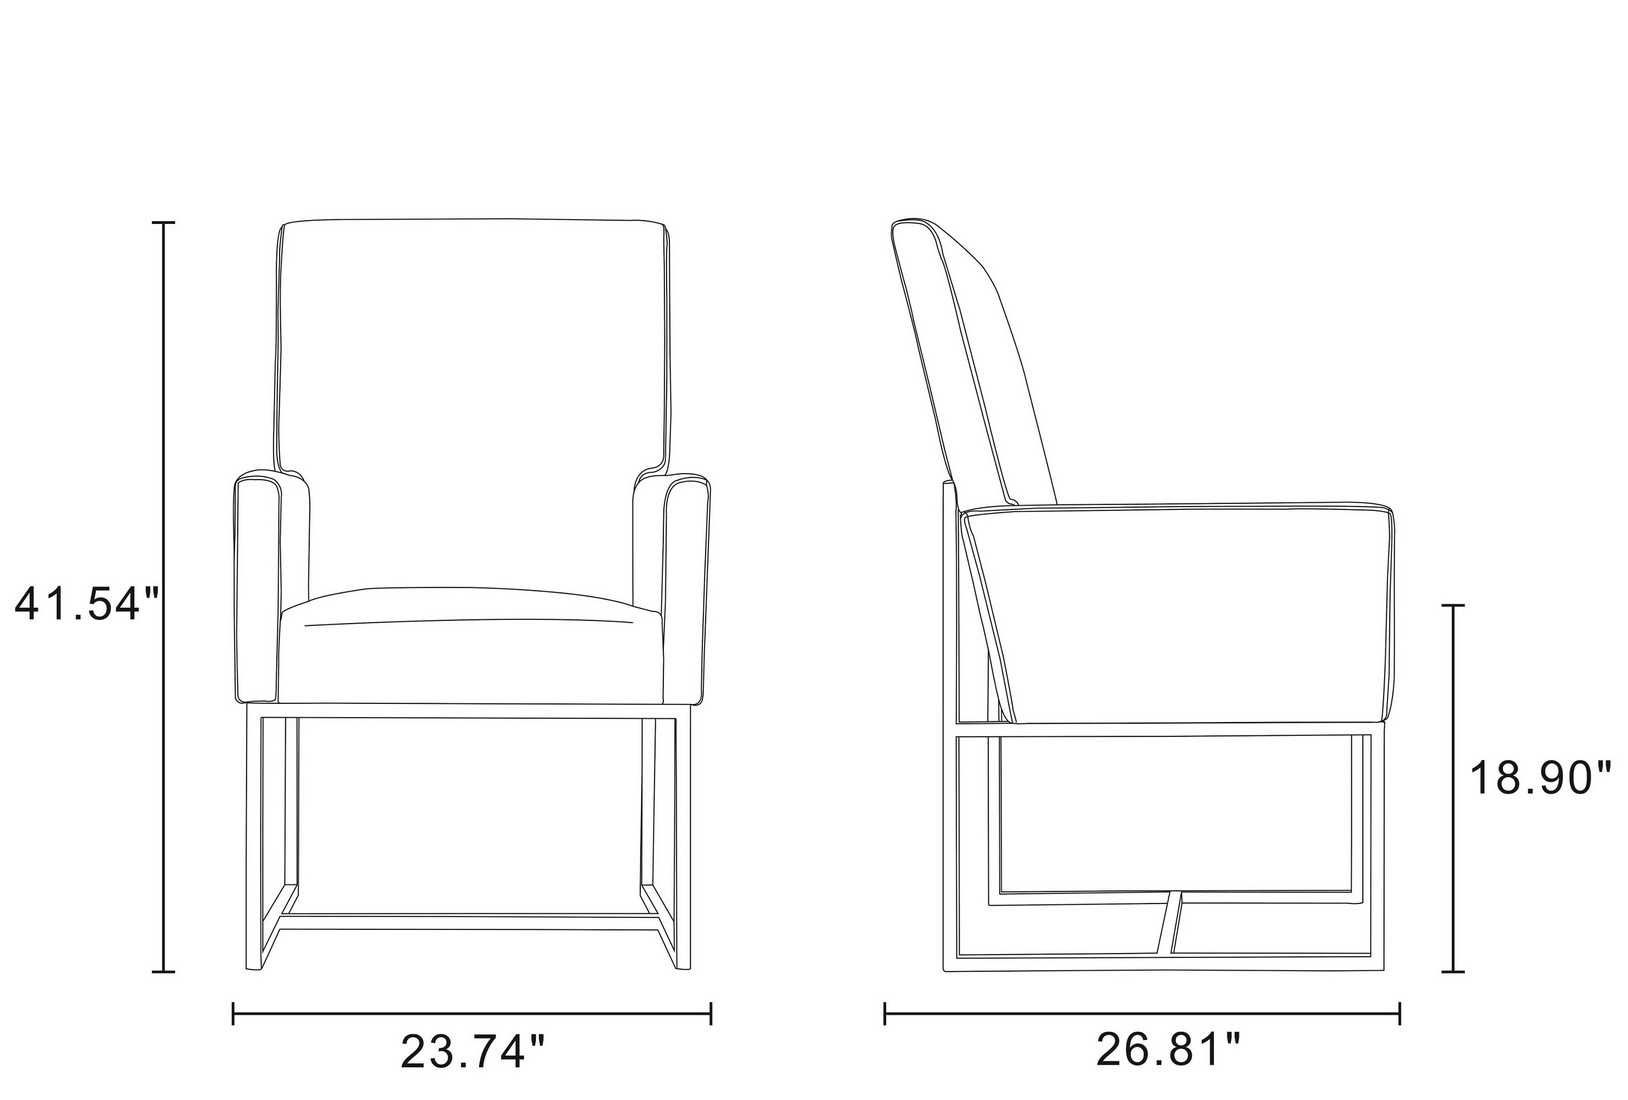 Weight and Dimension (Length, Depth, Width, Height) of Mondella Hella Dining Armchair from Dining Table Mart (MON046301 / MON046302)